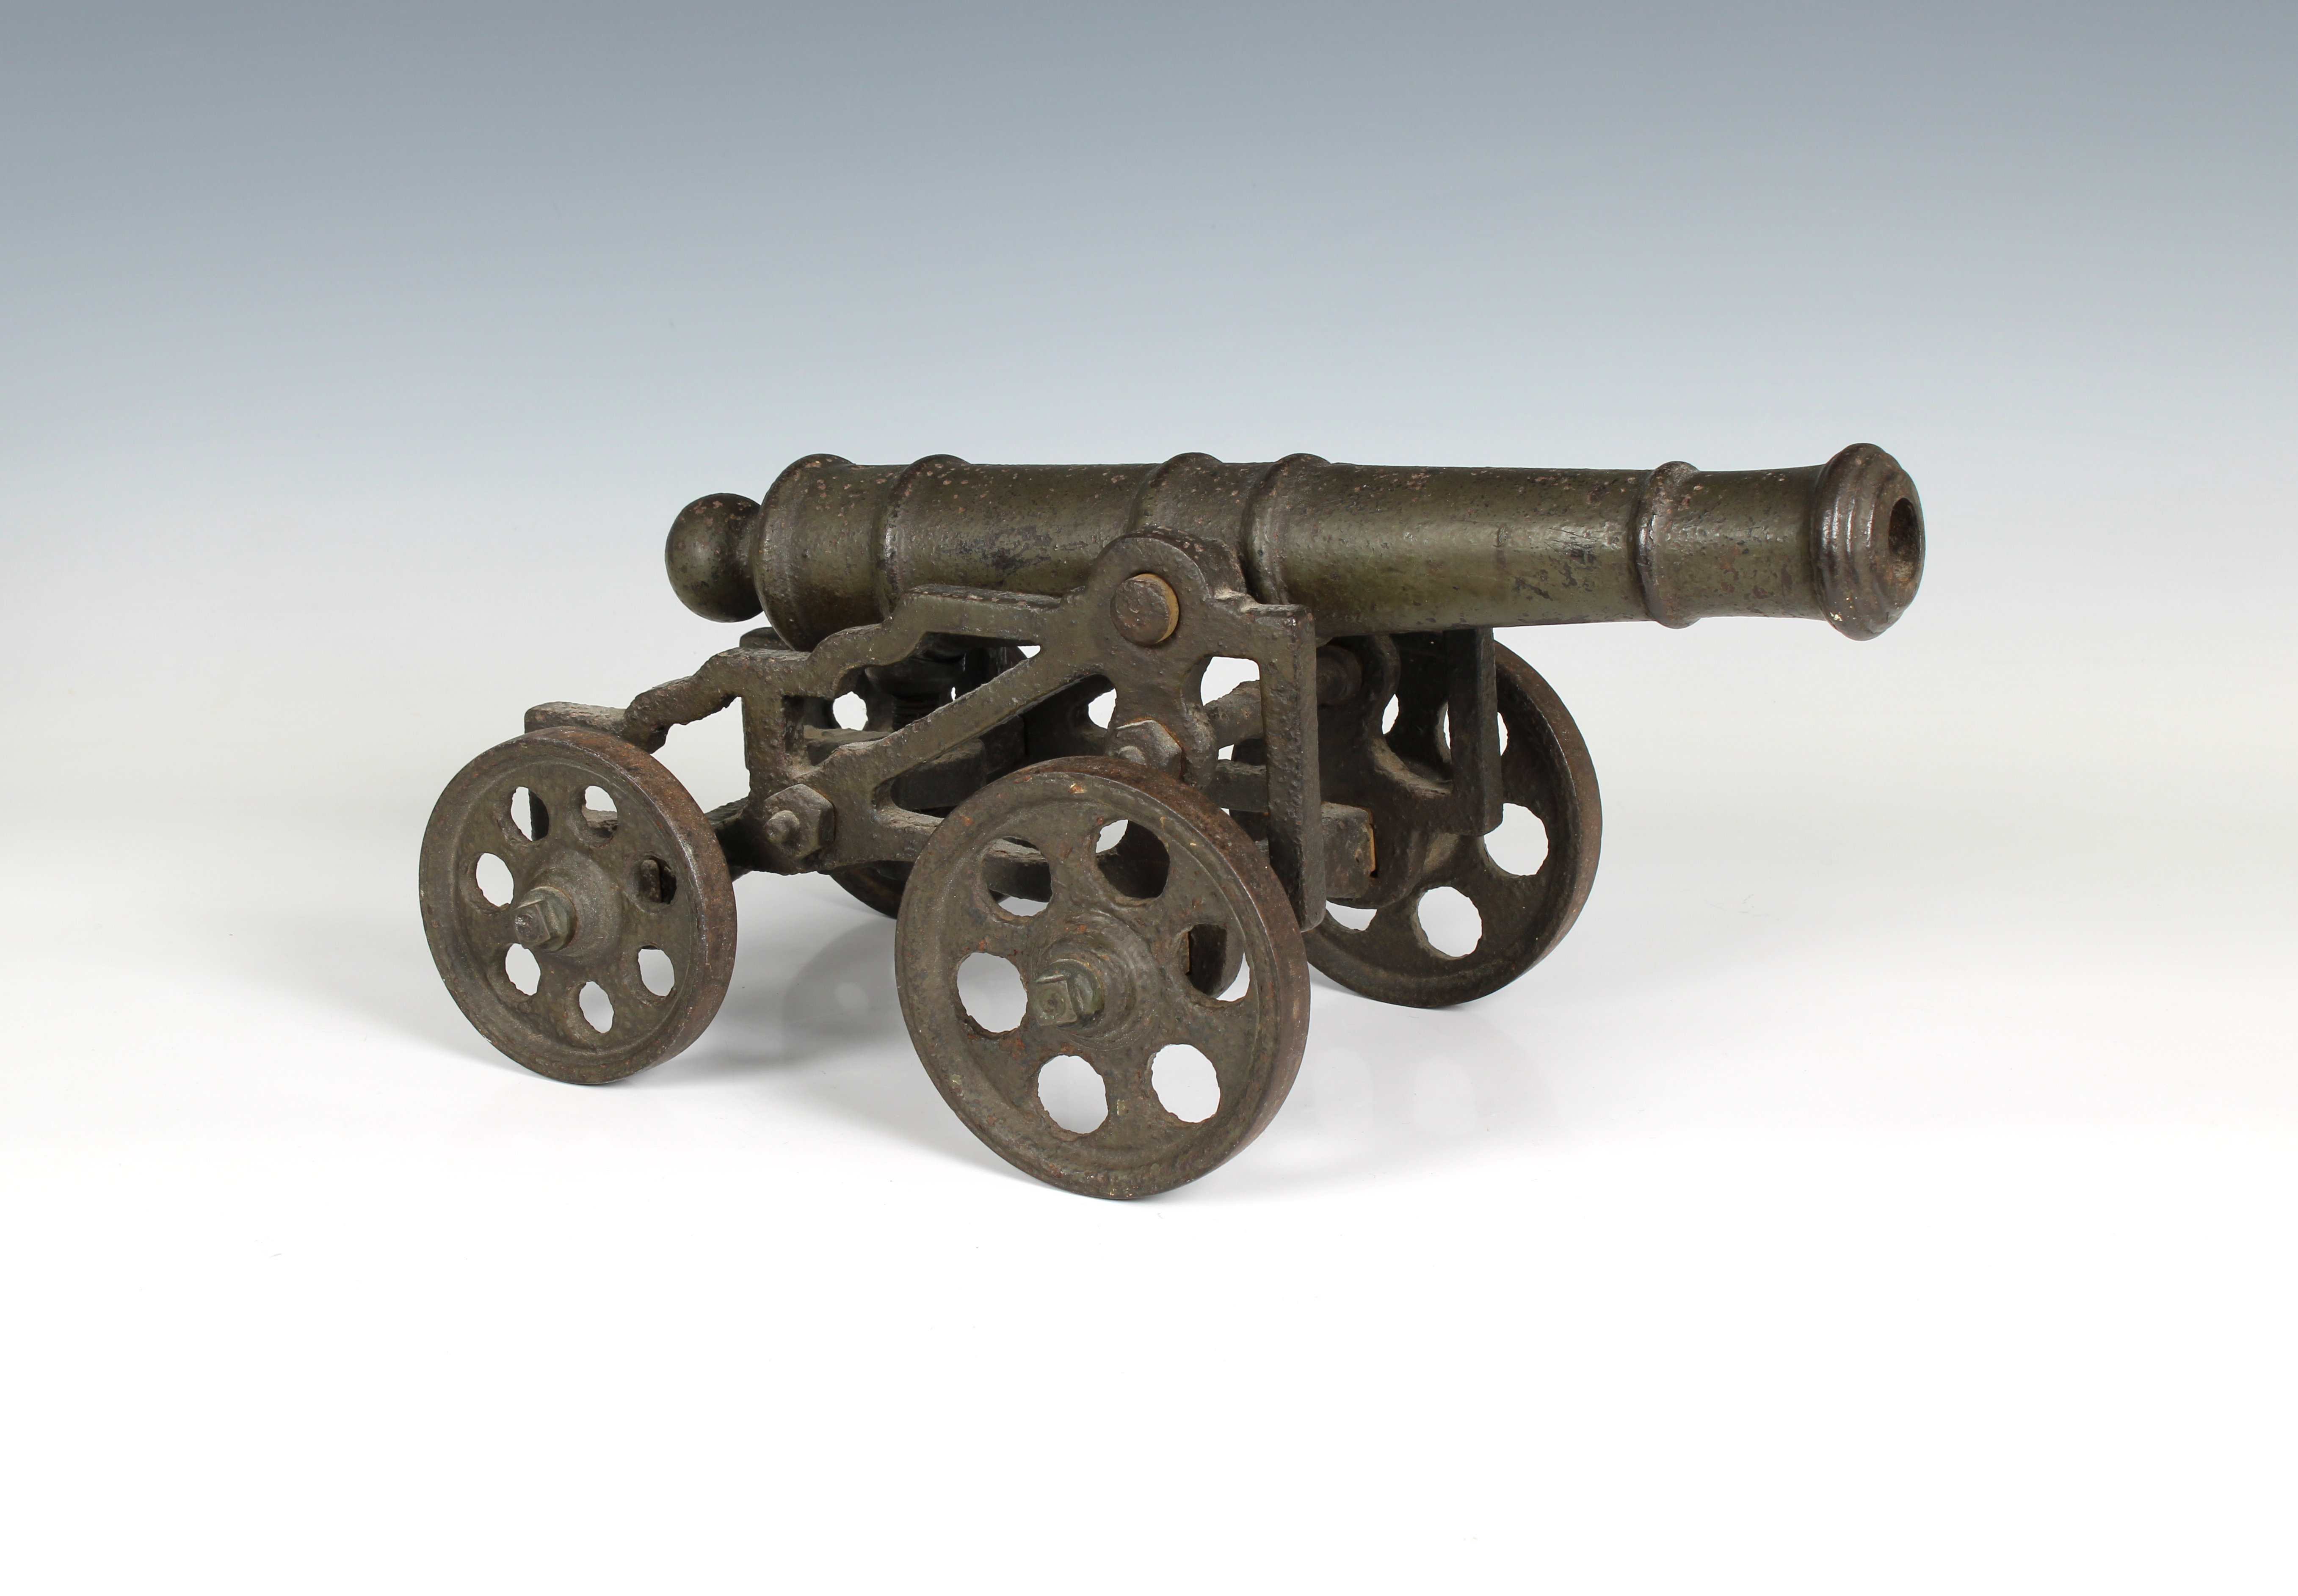 A model cannon with an iron barrel and iron four wheeled gun carriage